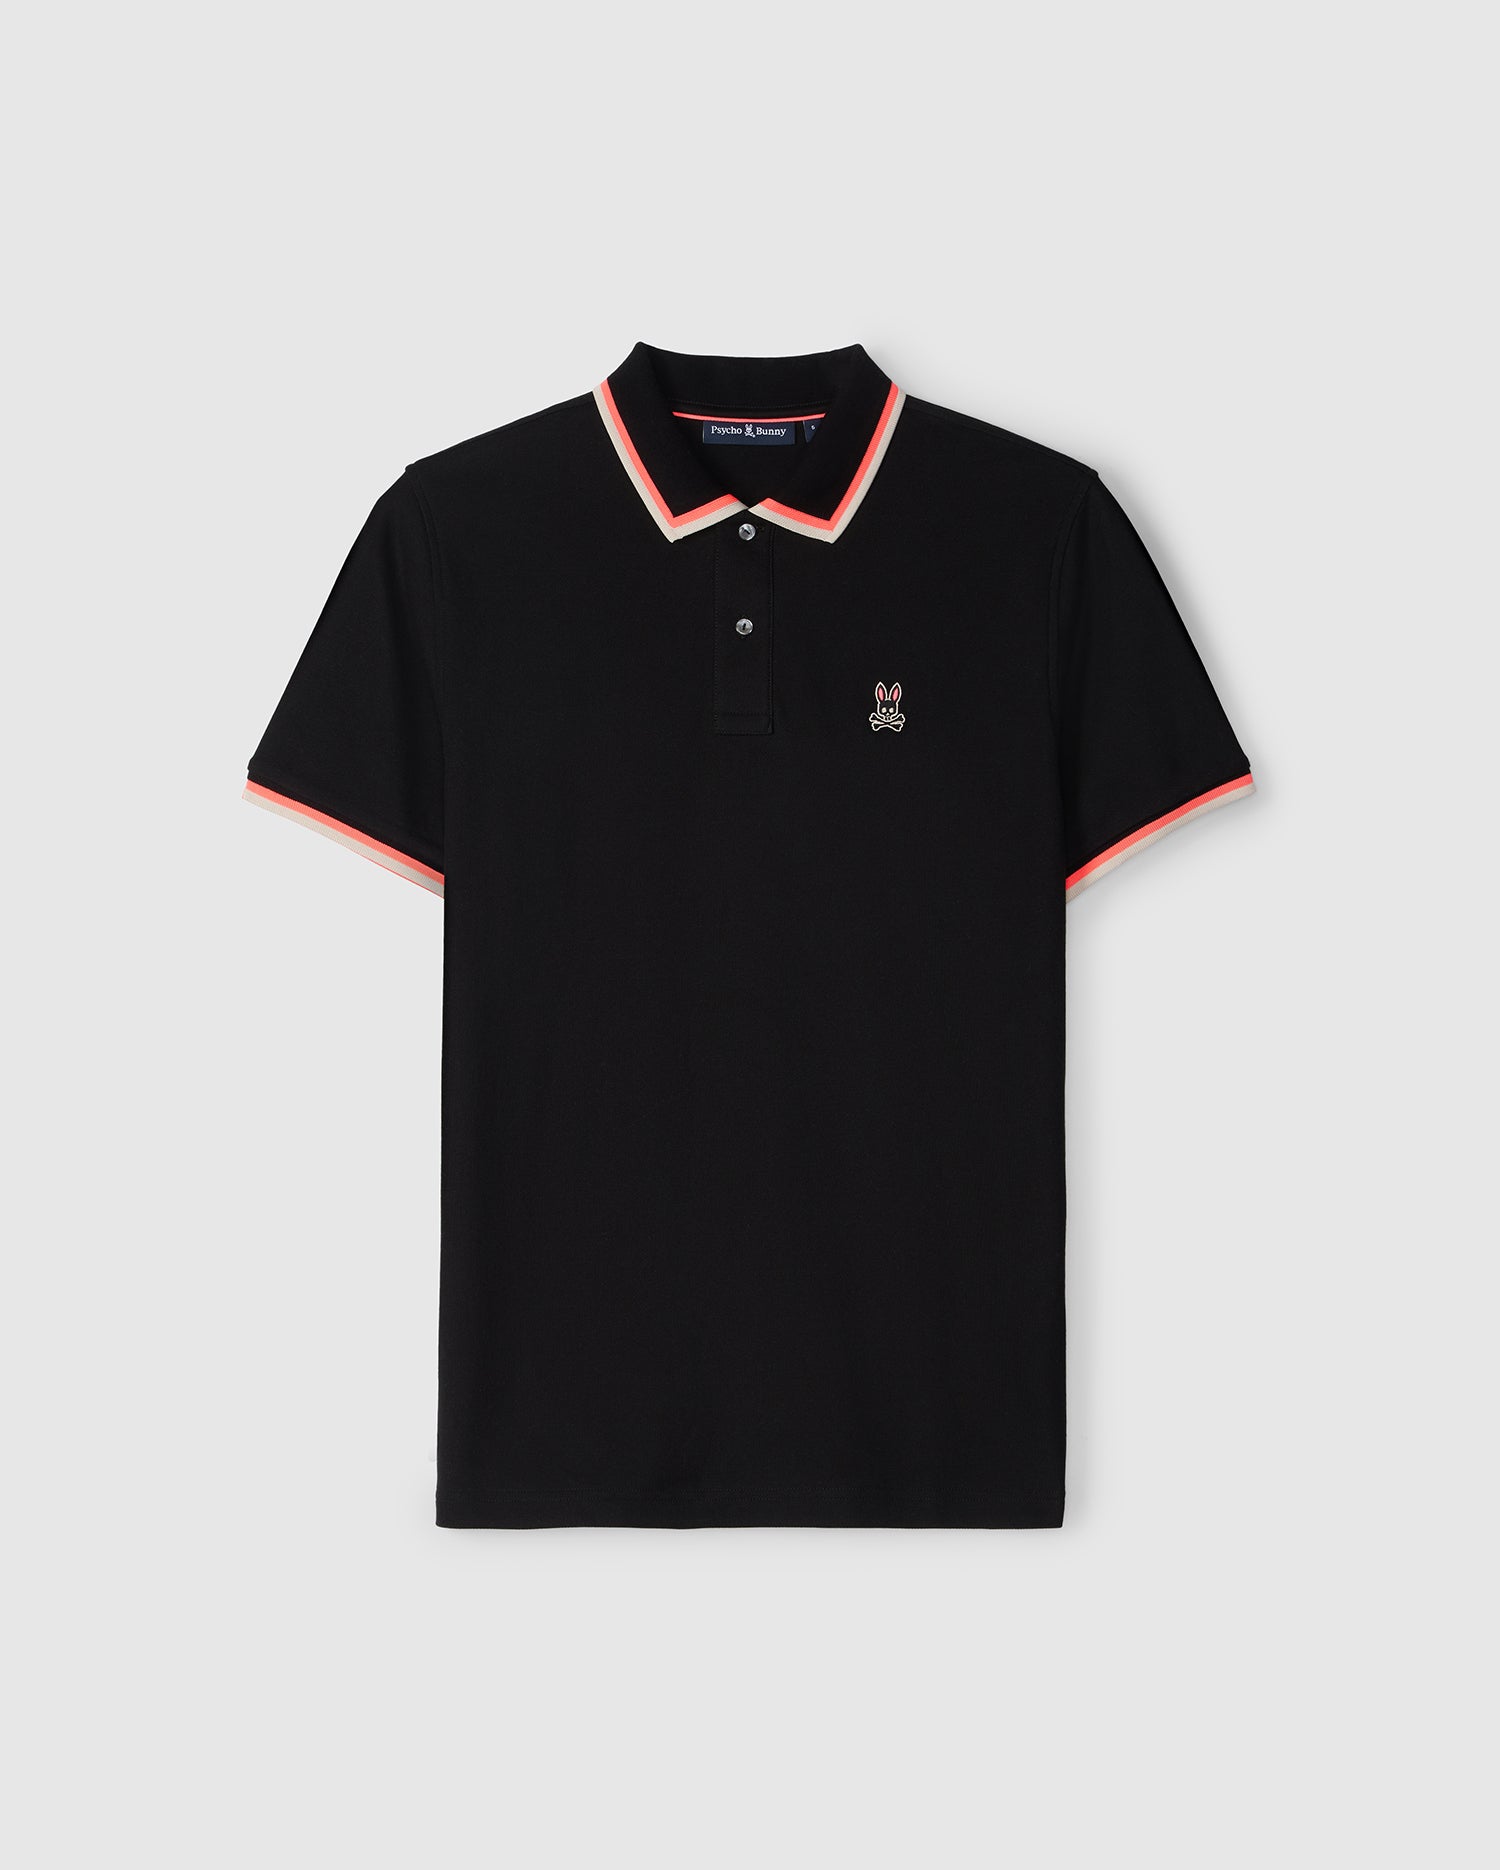 Psycho Bunny MENS KINGSBURY PIQUE POLO SHIRT - B6K235B200 with orange trim on the collar and sleeves, featuring a small white logo on the left chest area, displayed against a plain background.